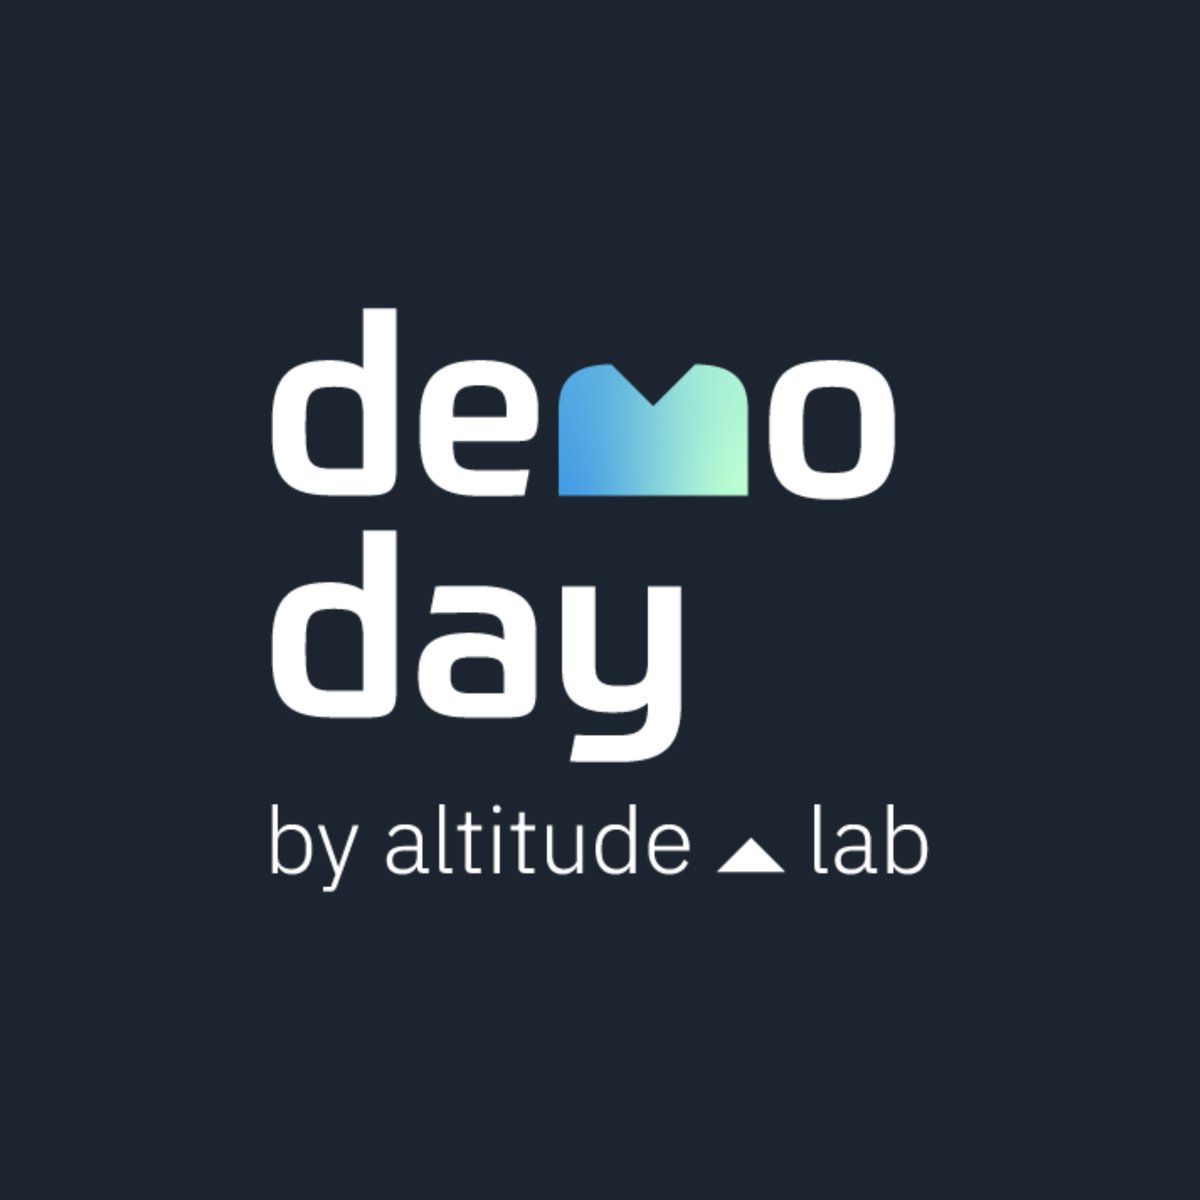 #Biohive — don't miss your opportunity to attend @AltitudeLab's 3rd annual Demo Day! 

We know it will be a full house this year, so register while spots are still available & join us in celebrating the incredible work happening across #startups at Altitude.

Tickets: